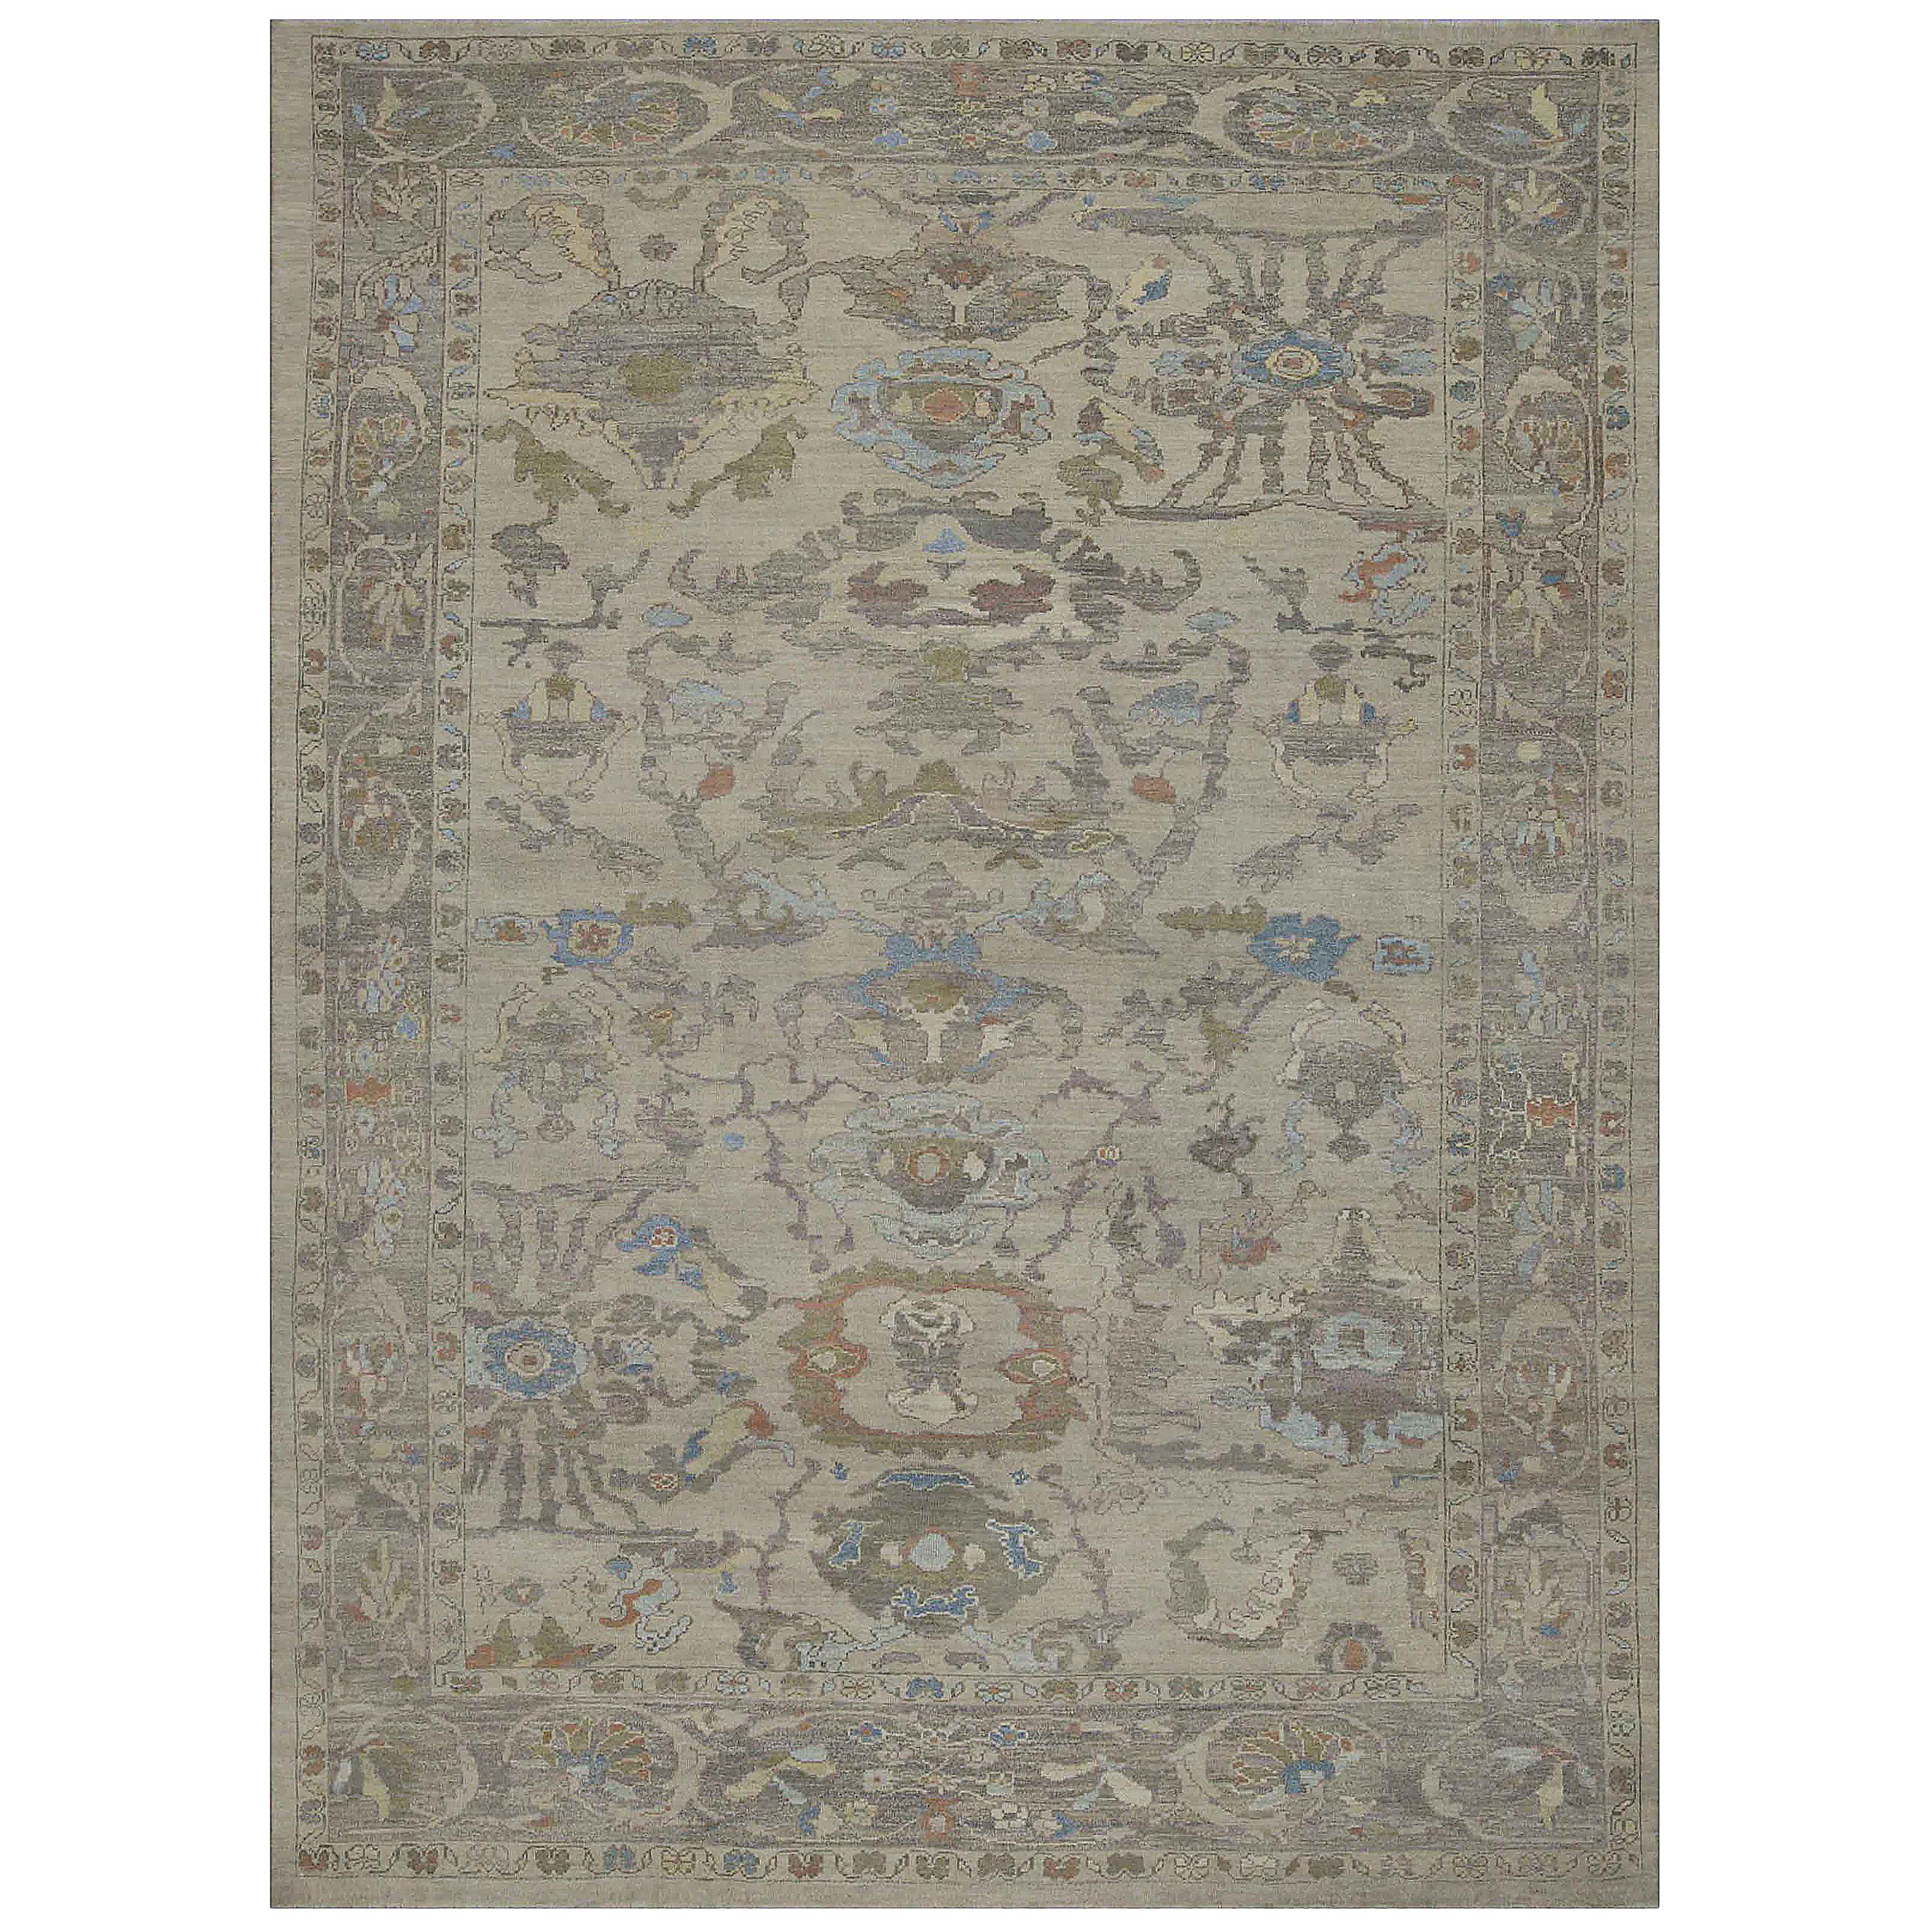 Modern Oushak Rug with Floral Motifs in Brown, Gray and Blue on Beige Field